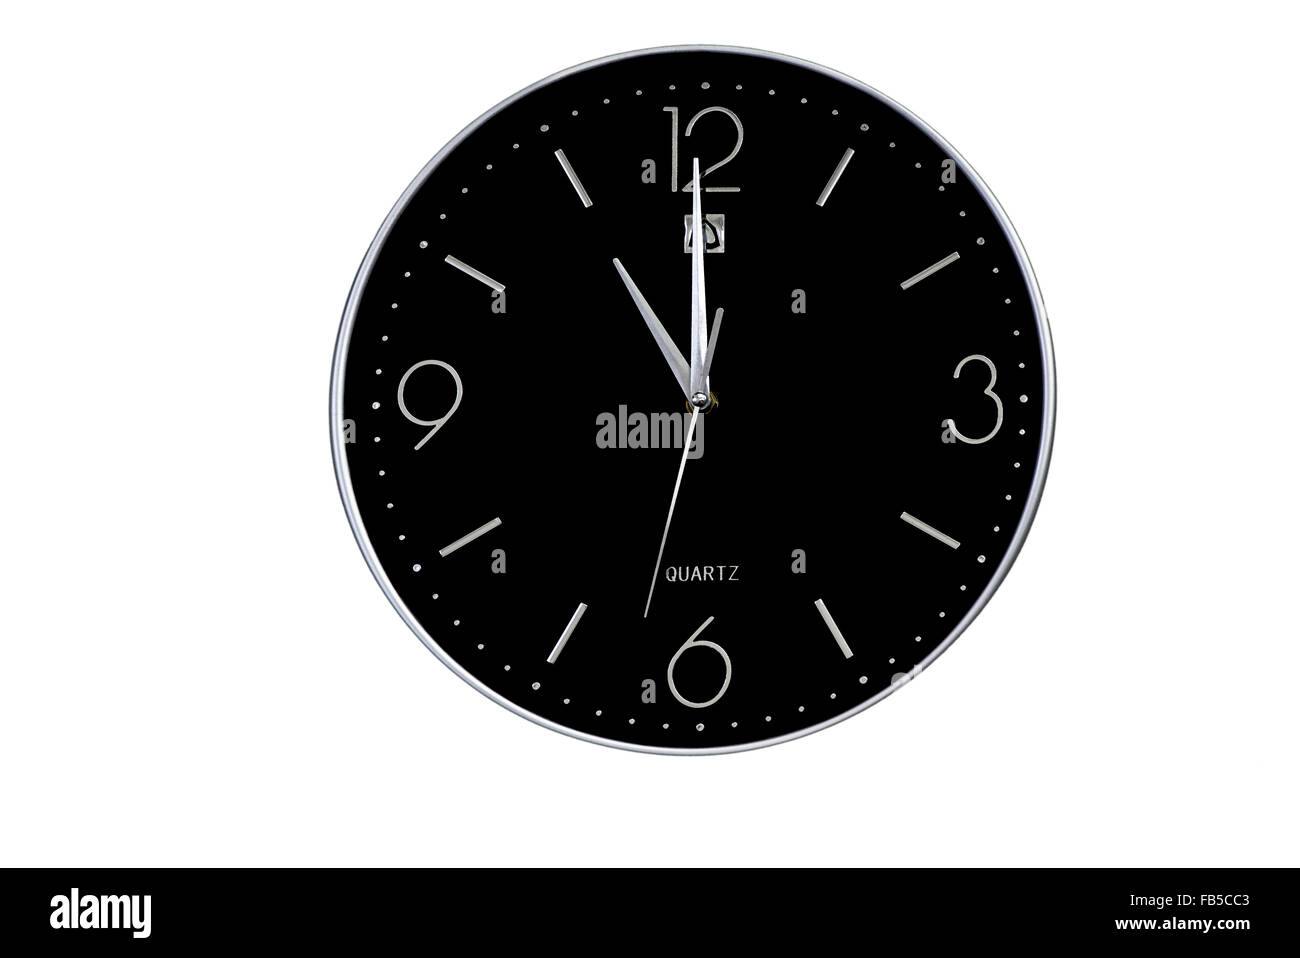 Clock, black face. Cut out of a black faced analogue wall clock against a white background. Stock Photo